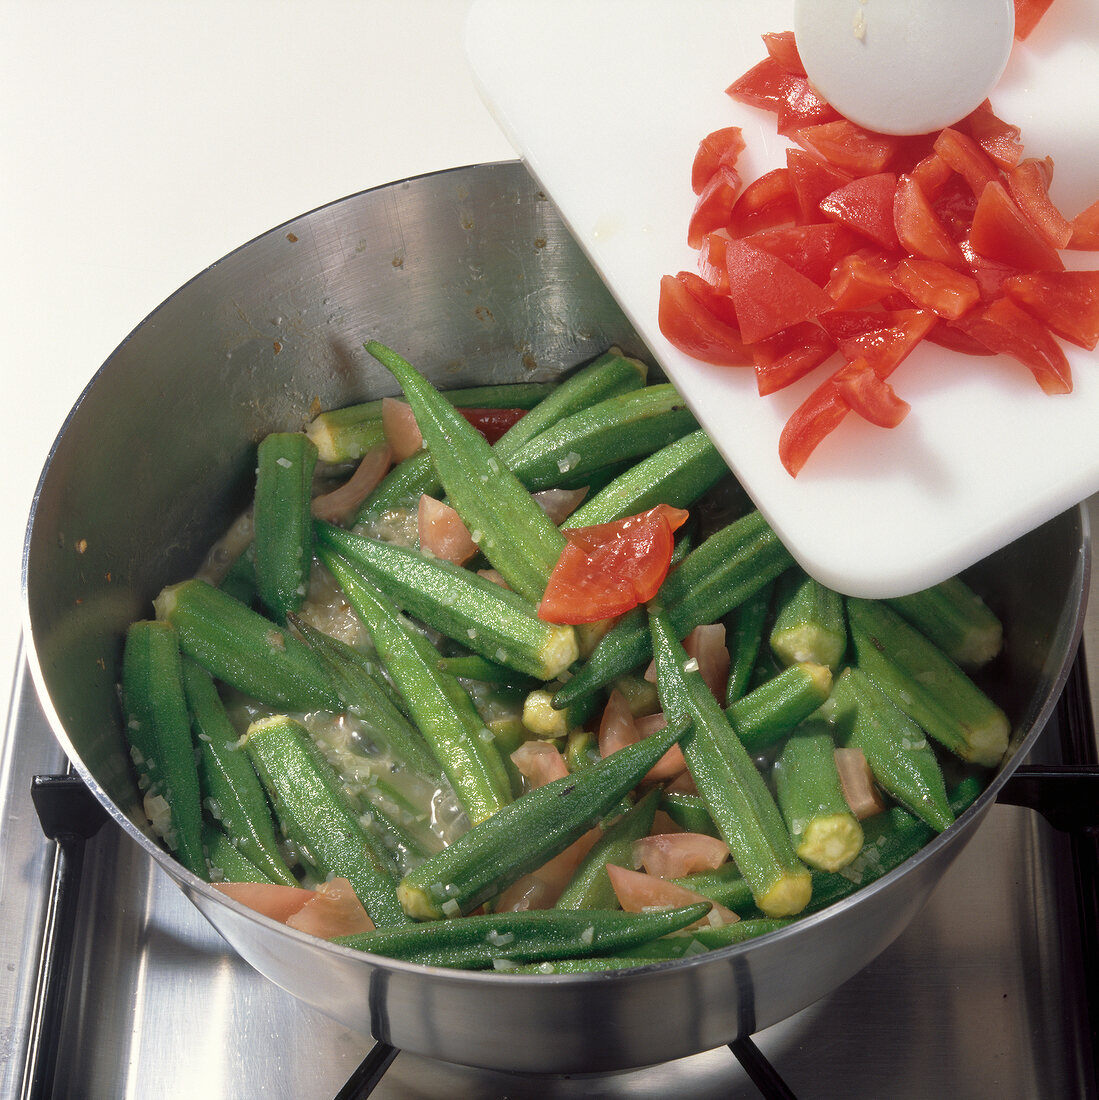 Adding diced tomatoes to okra in saucepan on stove, step 3